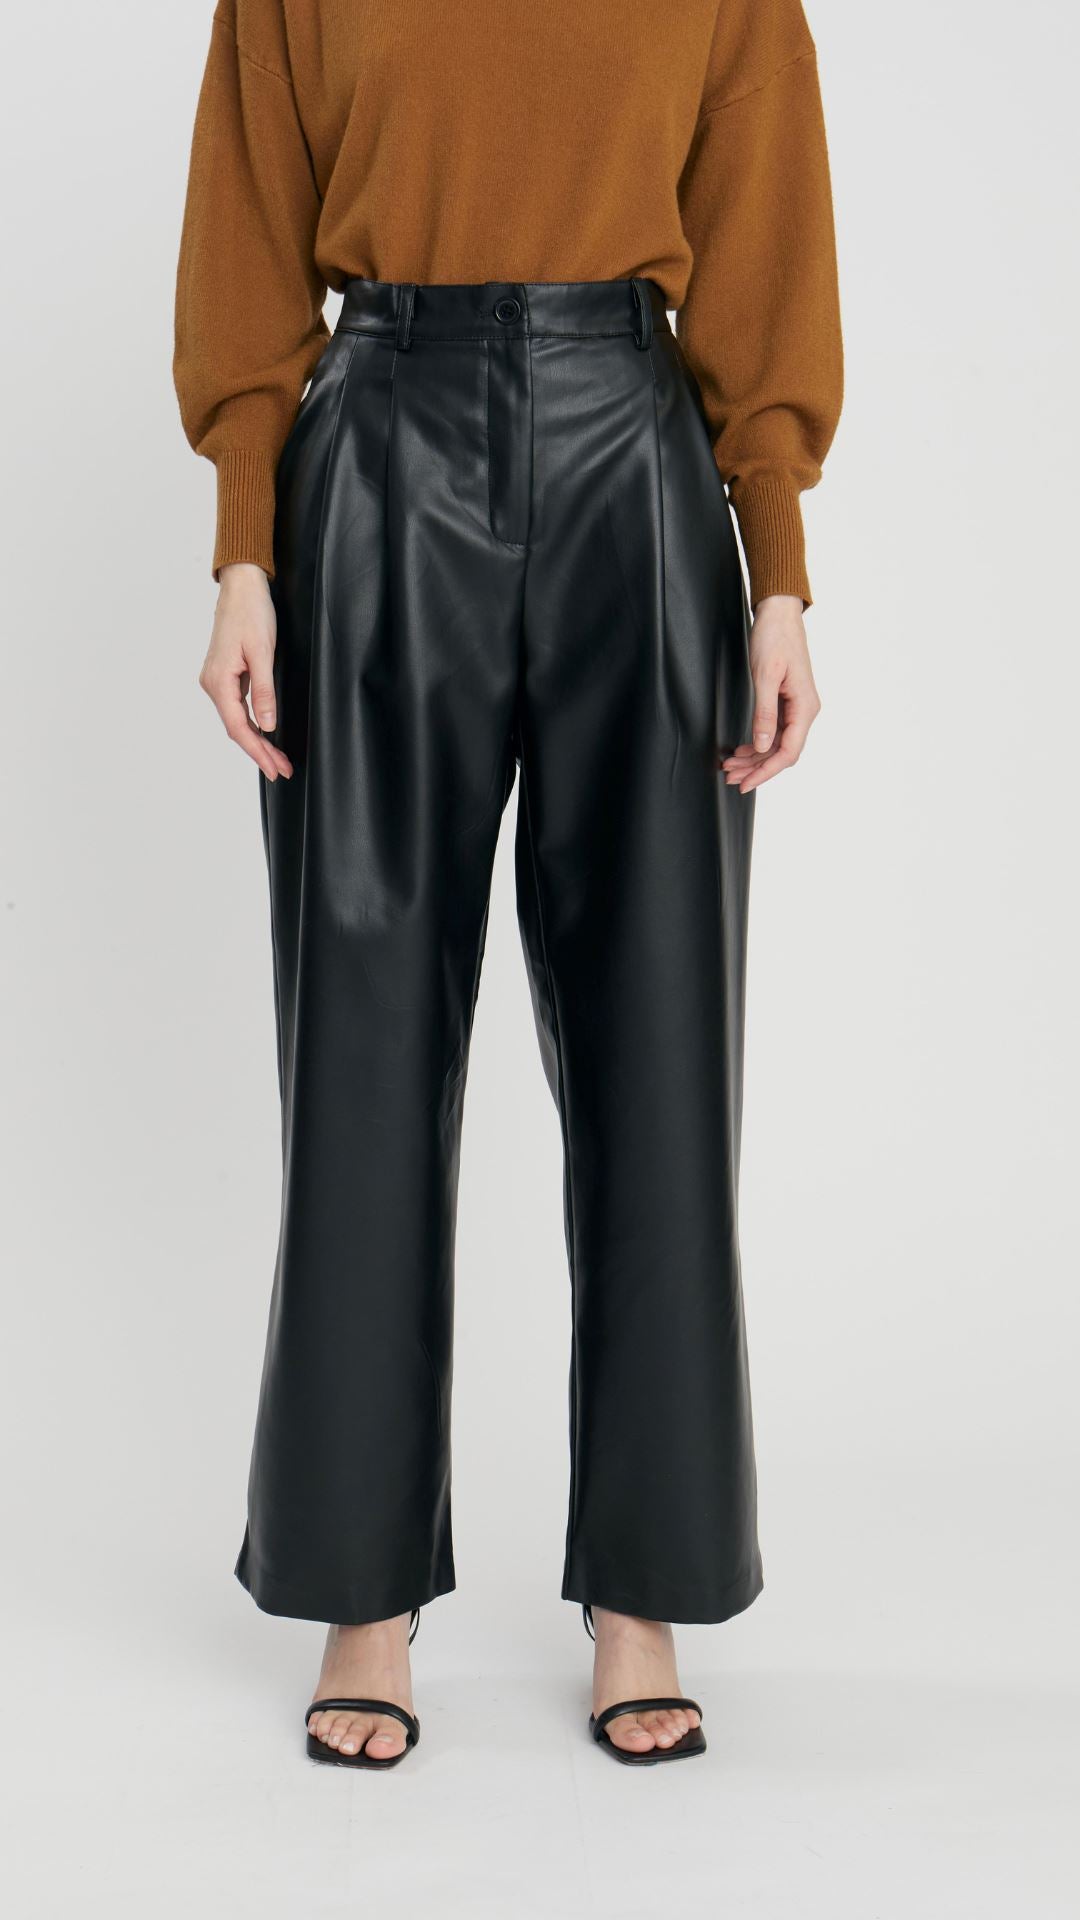 PLEATED BLACK LEATHER TROUSER PANT DELUC 